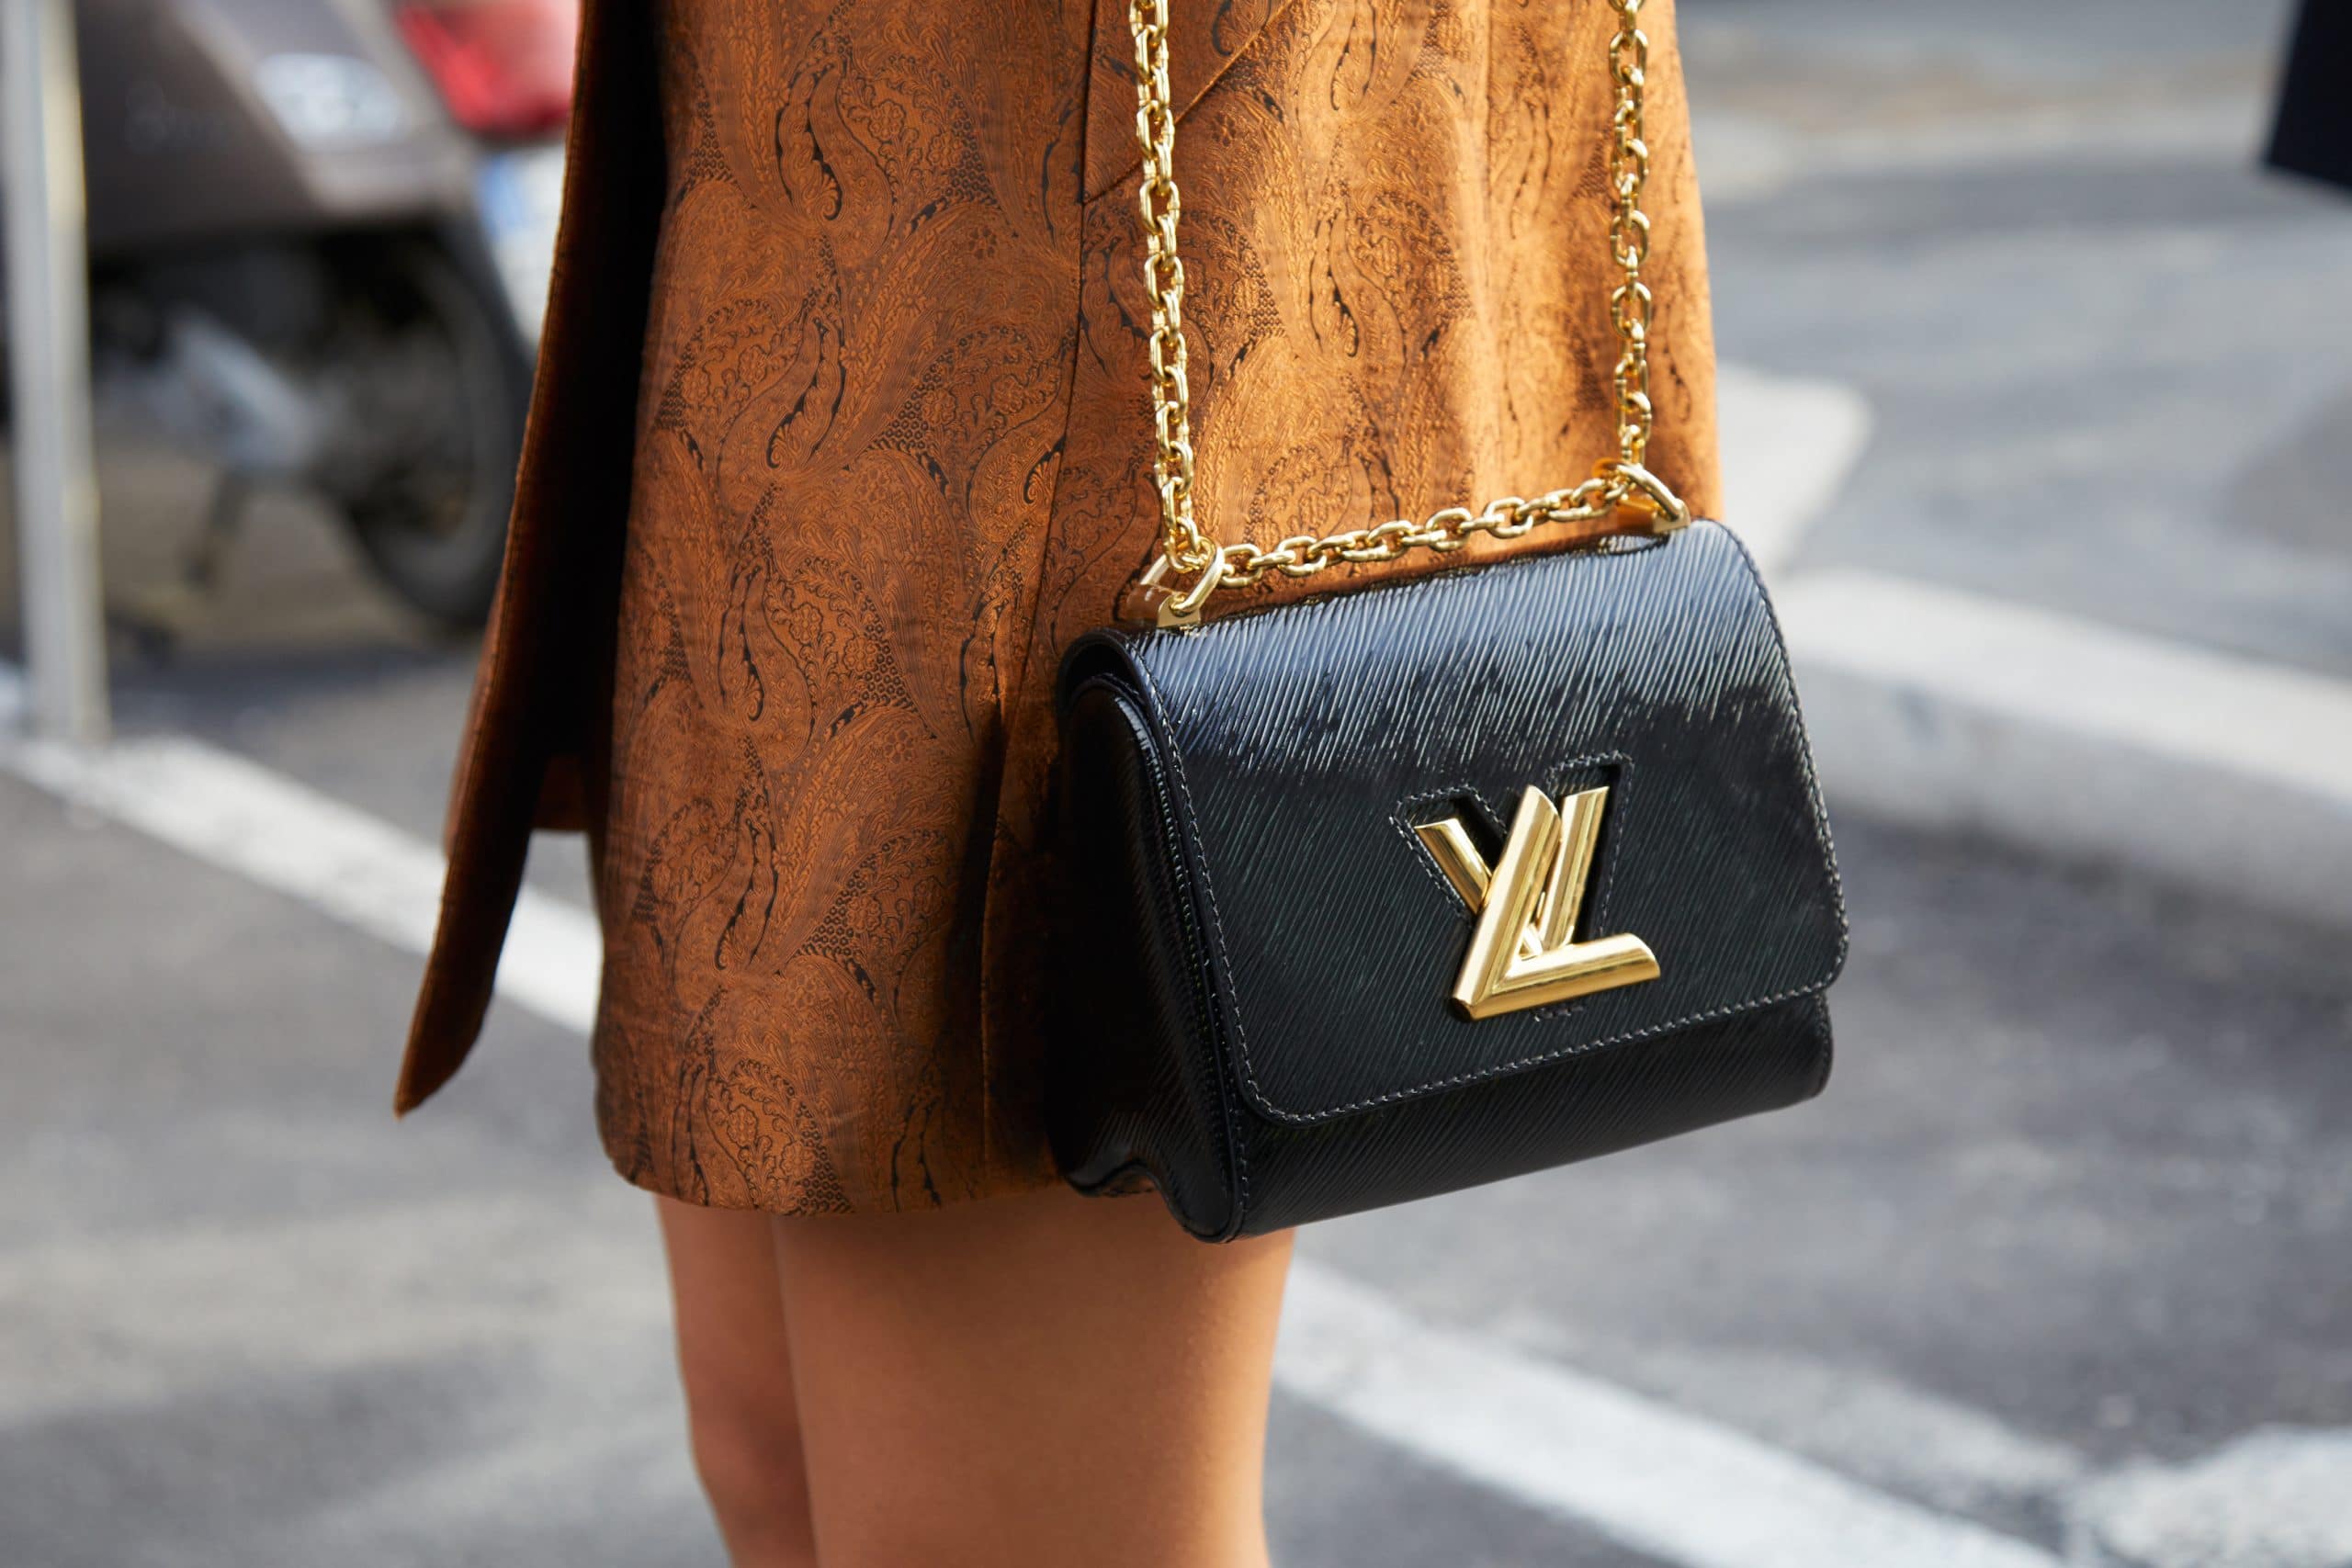 Read more about the article 9 Classic LV Black Bags: Louis Vuitton Black Bags You Need to Add to Your Collection